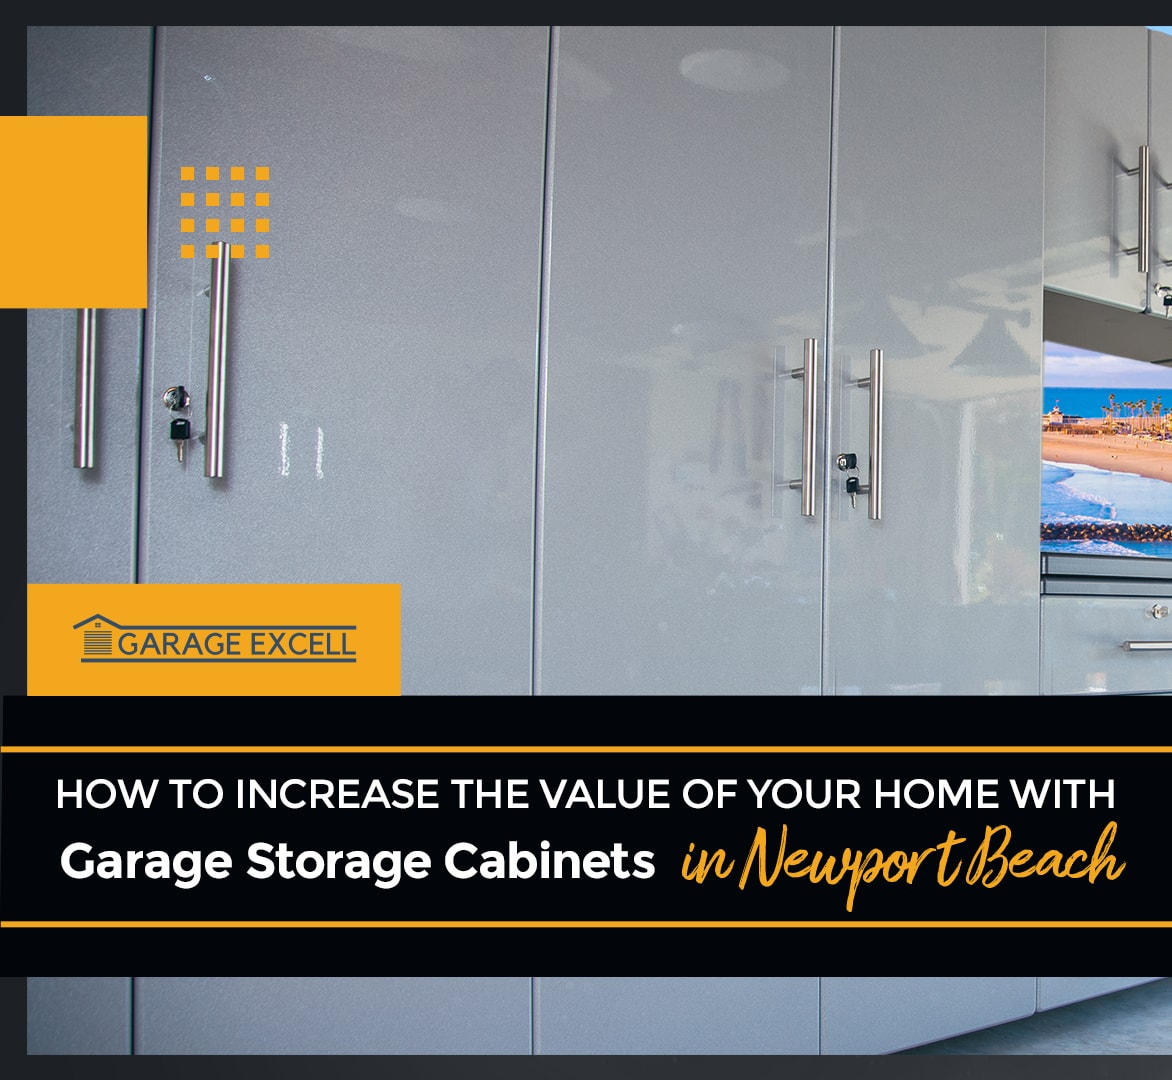 How to Increase the Value of your home with Garage Storage Cabinets in Newport Beach